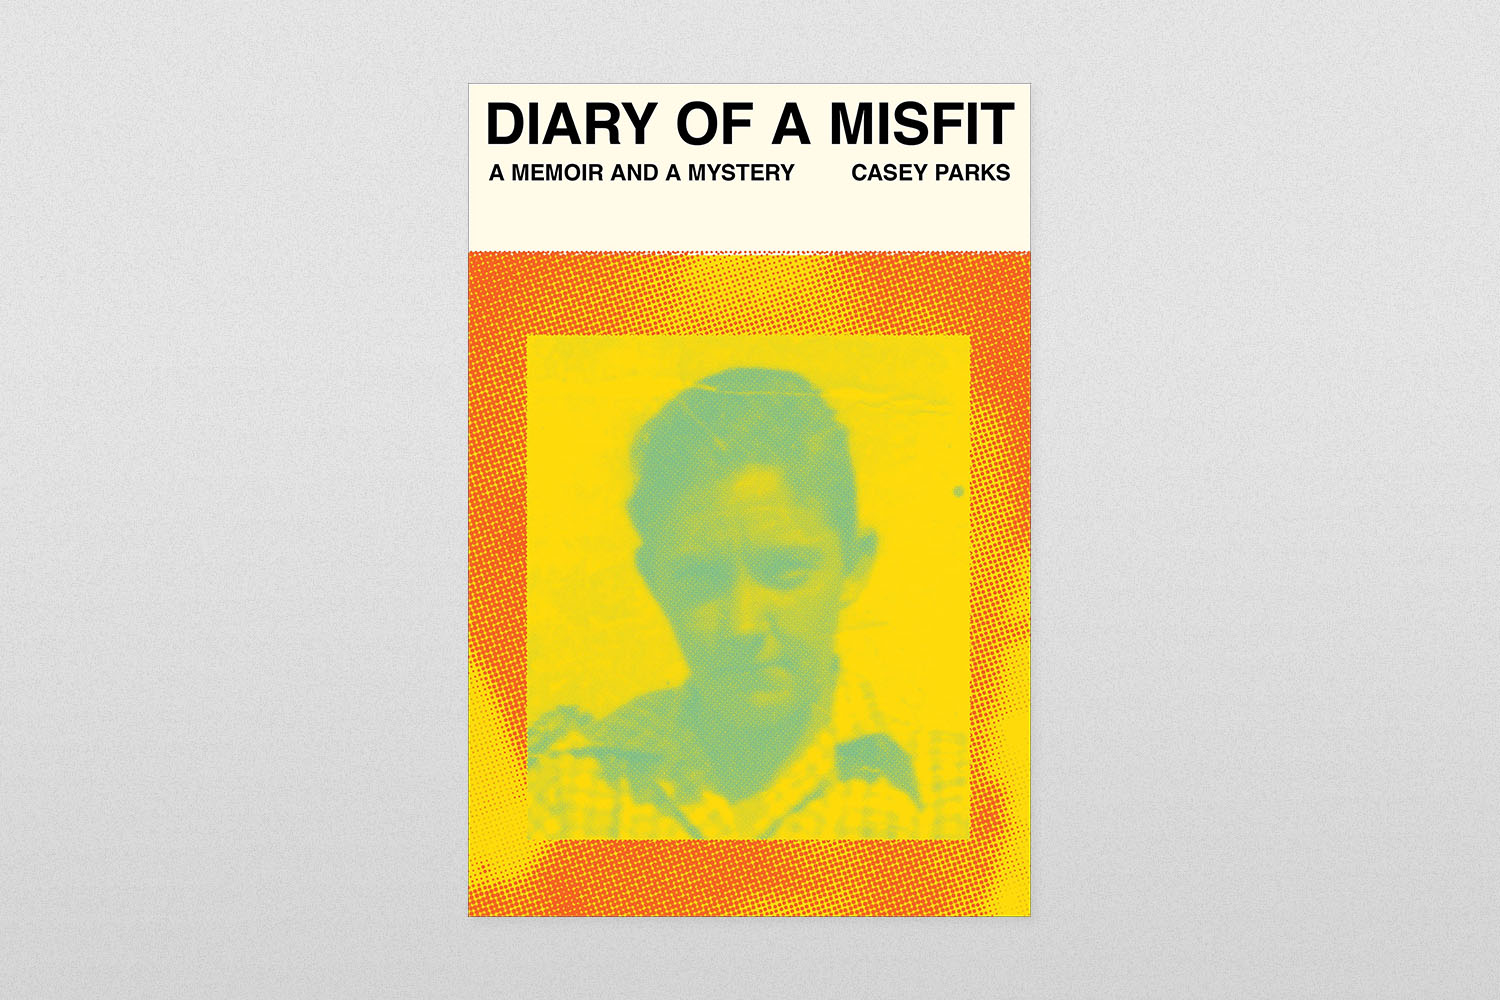 "Diary of a Misfit"